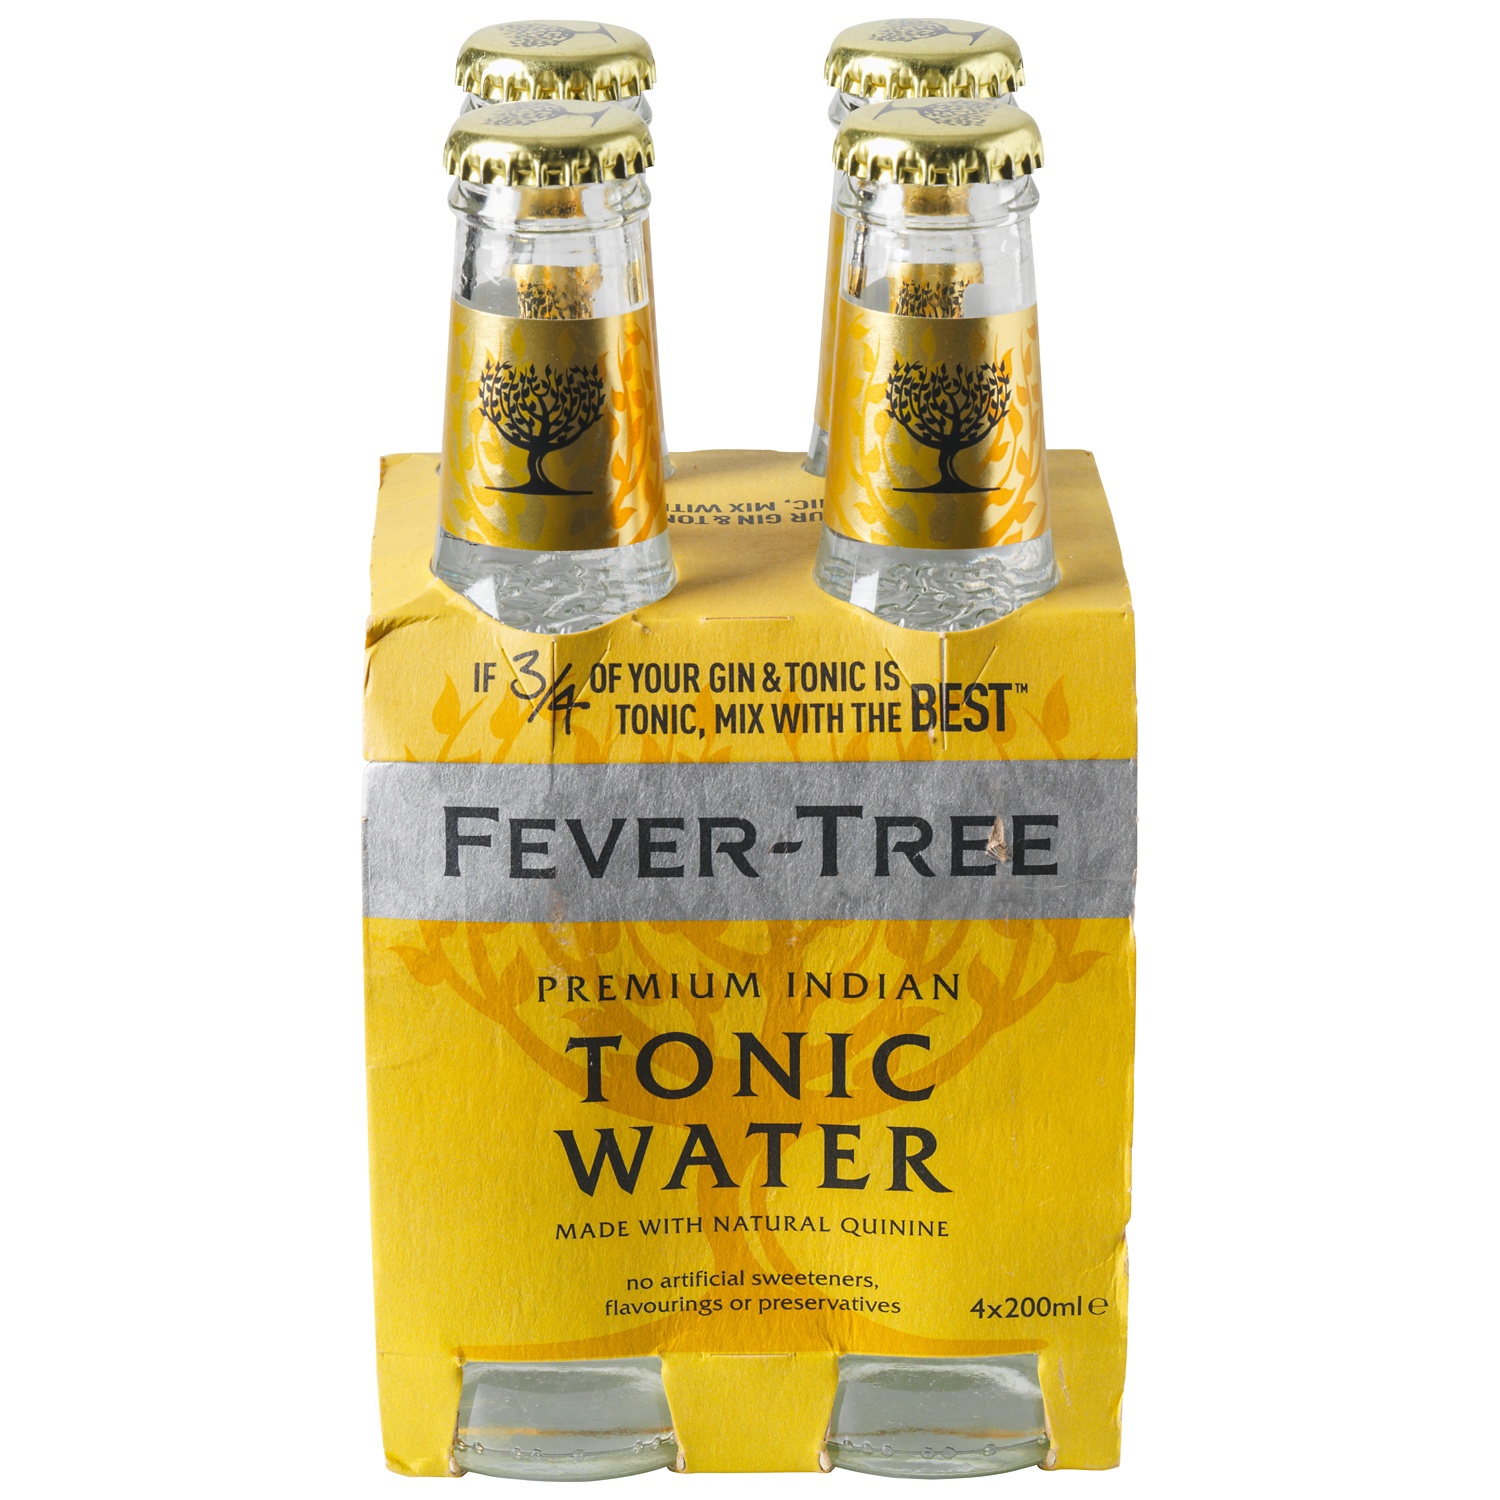 FEVER-TREE, Tonic Water